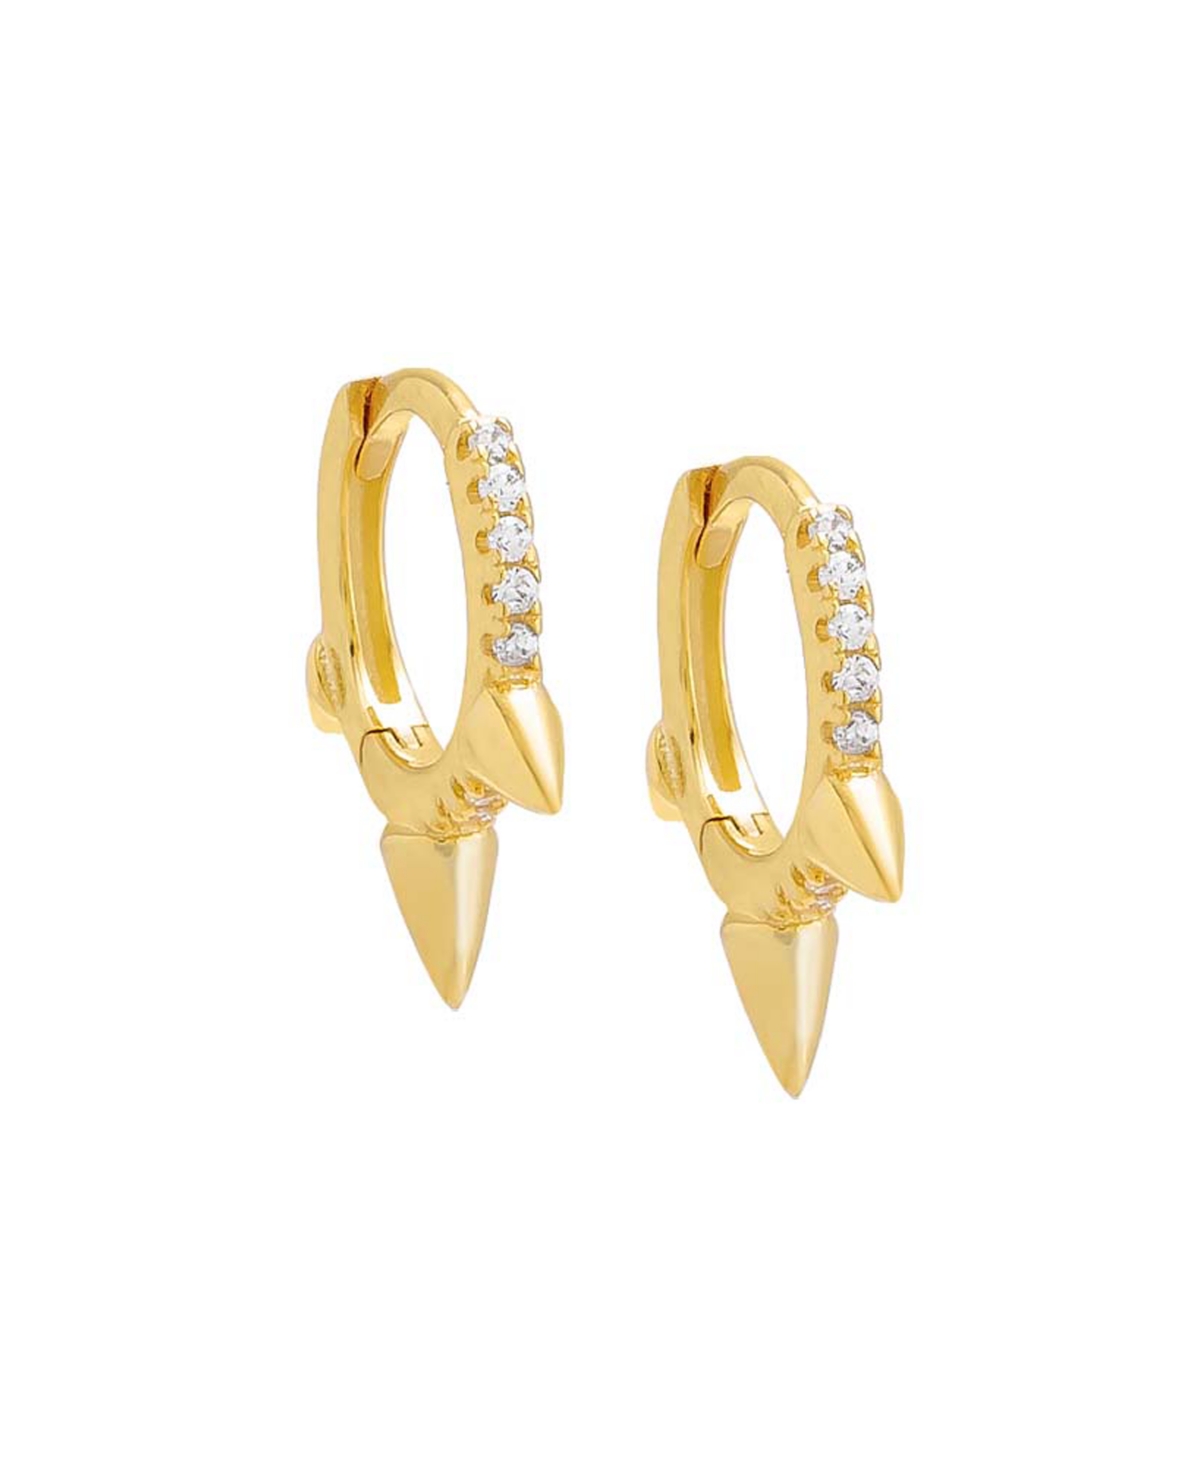 By Adina Eden 14k Gold-plated Sterling Silver Cubic Zirconia Triple Spike Extra Small Hoop Earrings, 0.39"